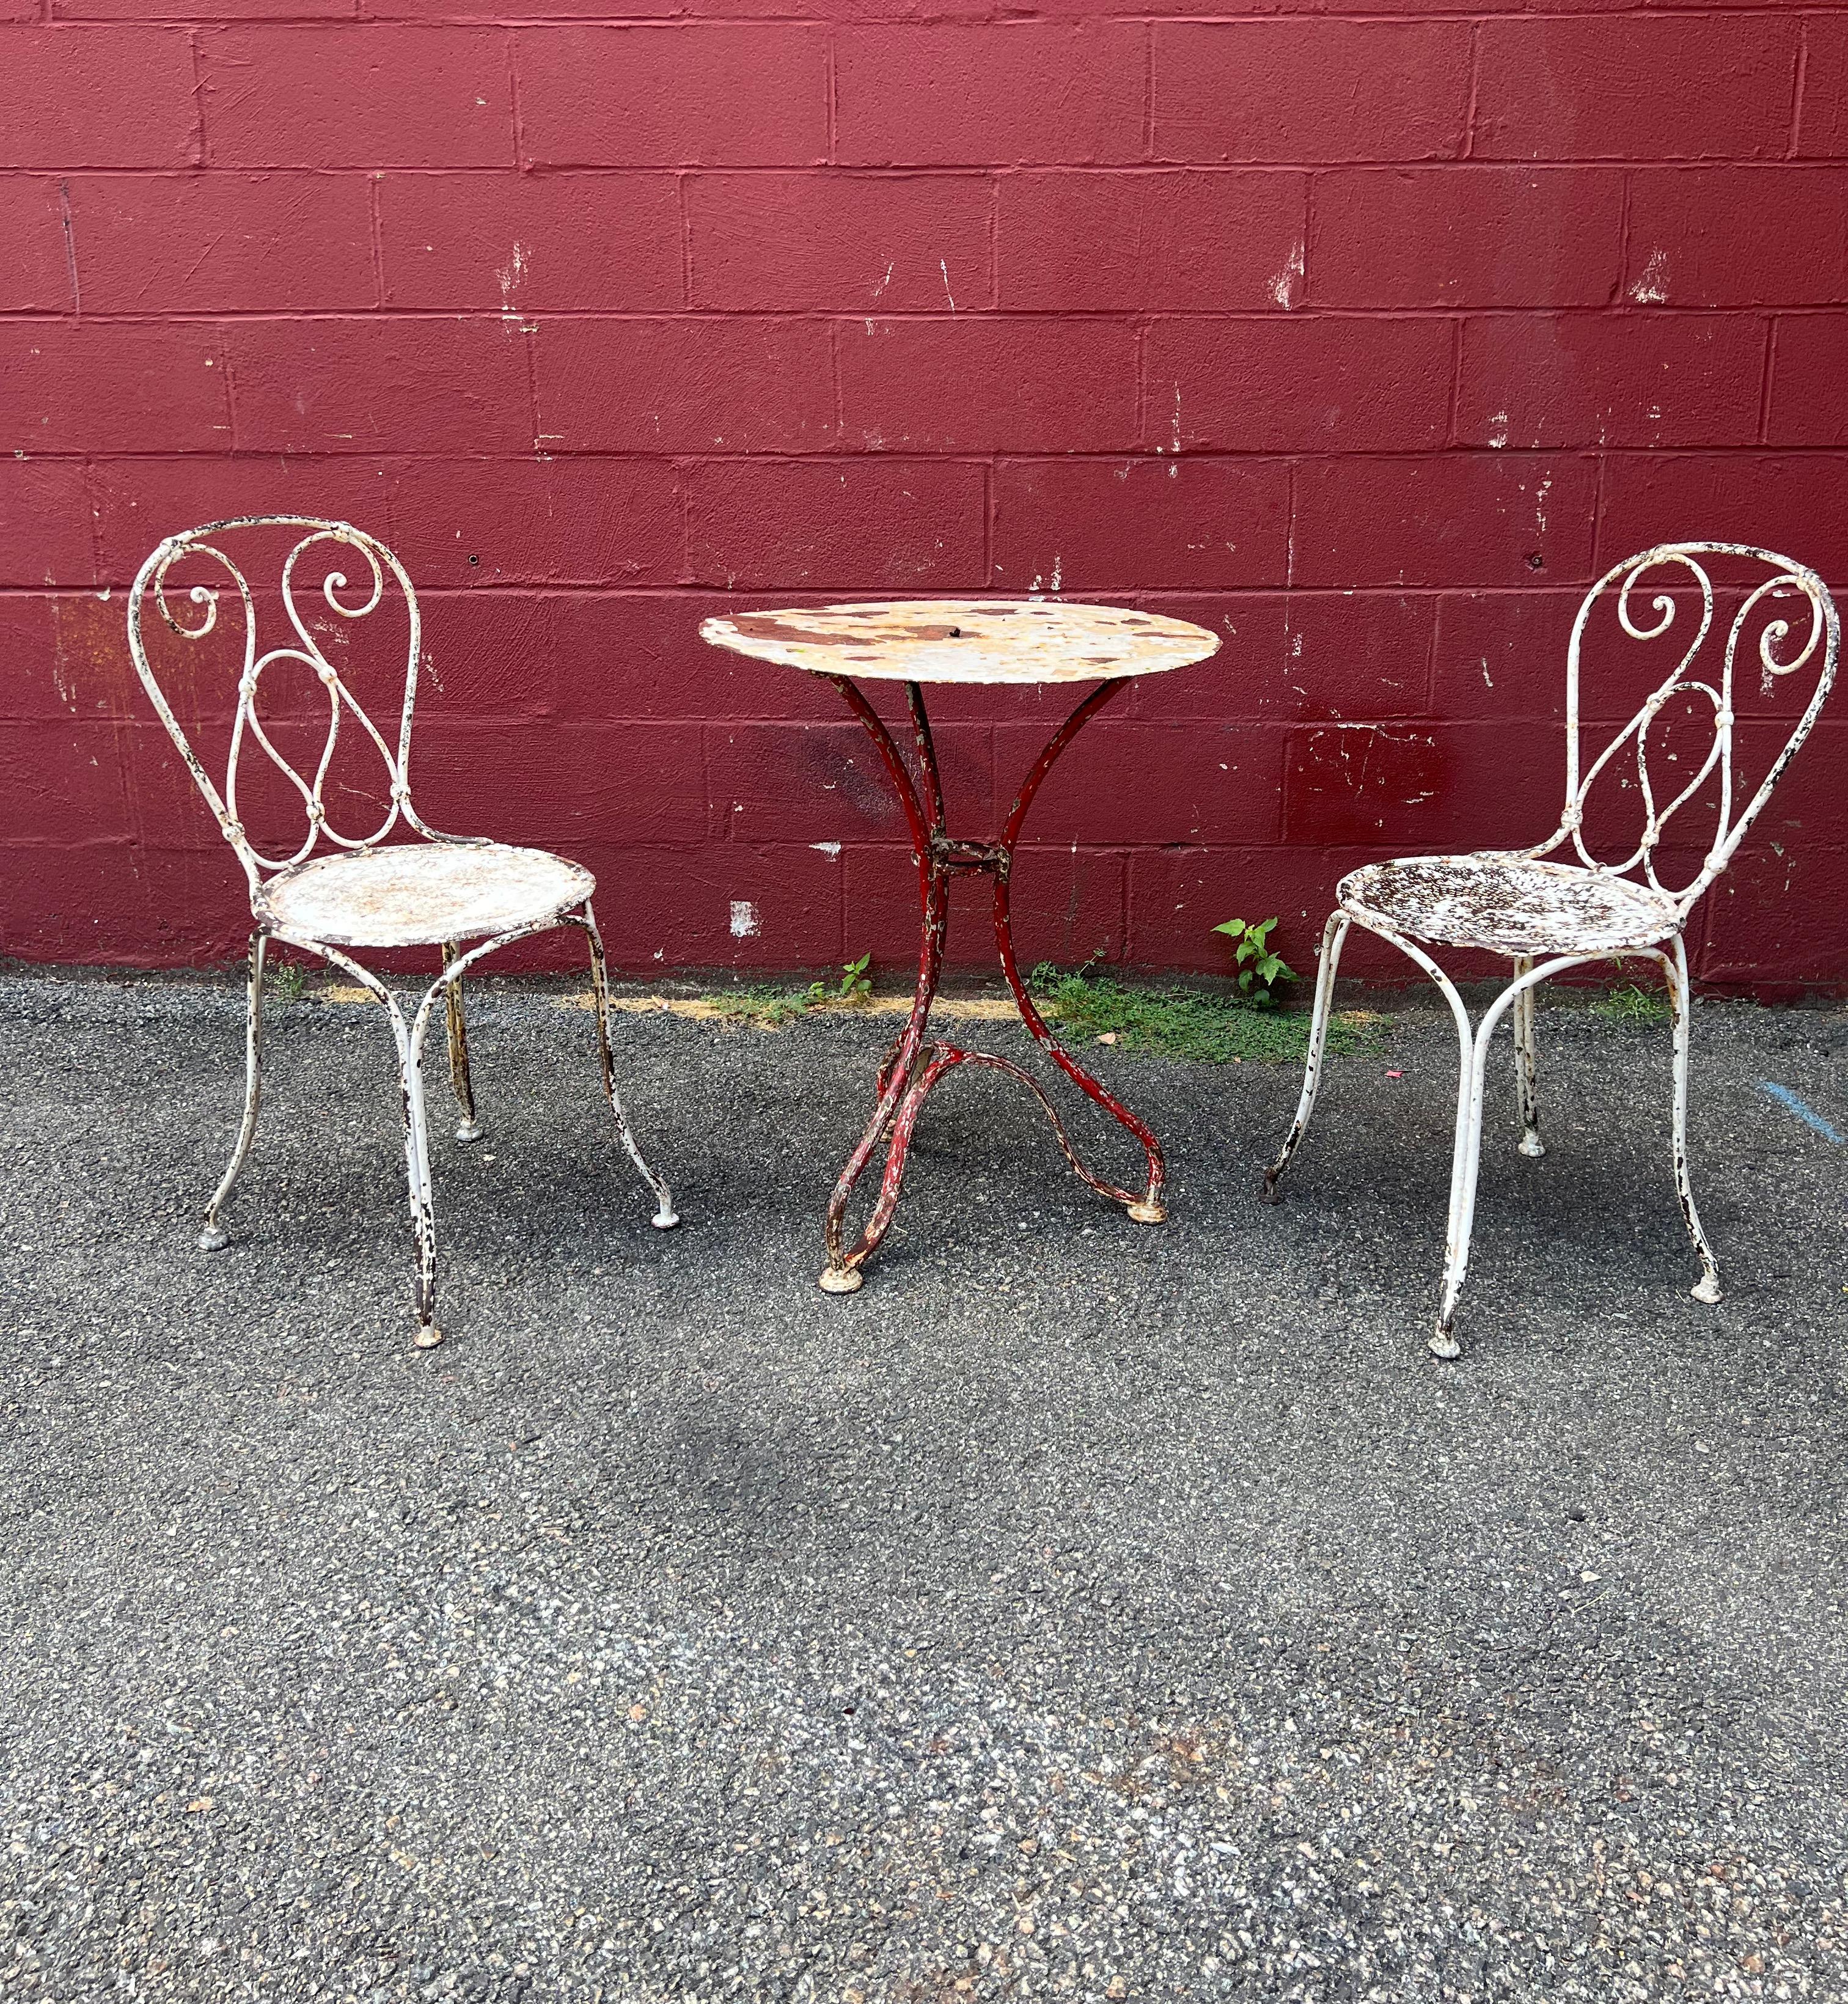 This French garden bistro table is a unique and charming piece that will add character to any outdoor space. The distressed red and white paint finish gives it a rustic and vintage look that is both stylish and functional. The white top is mounted